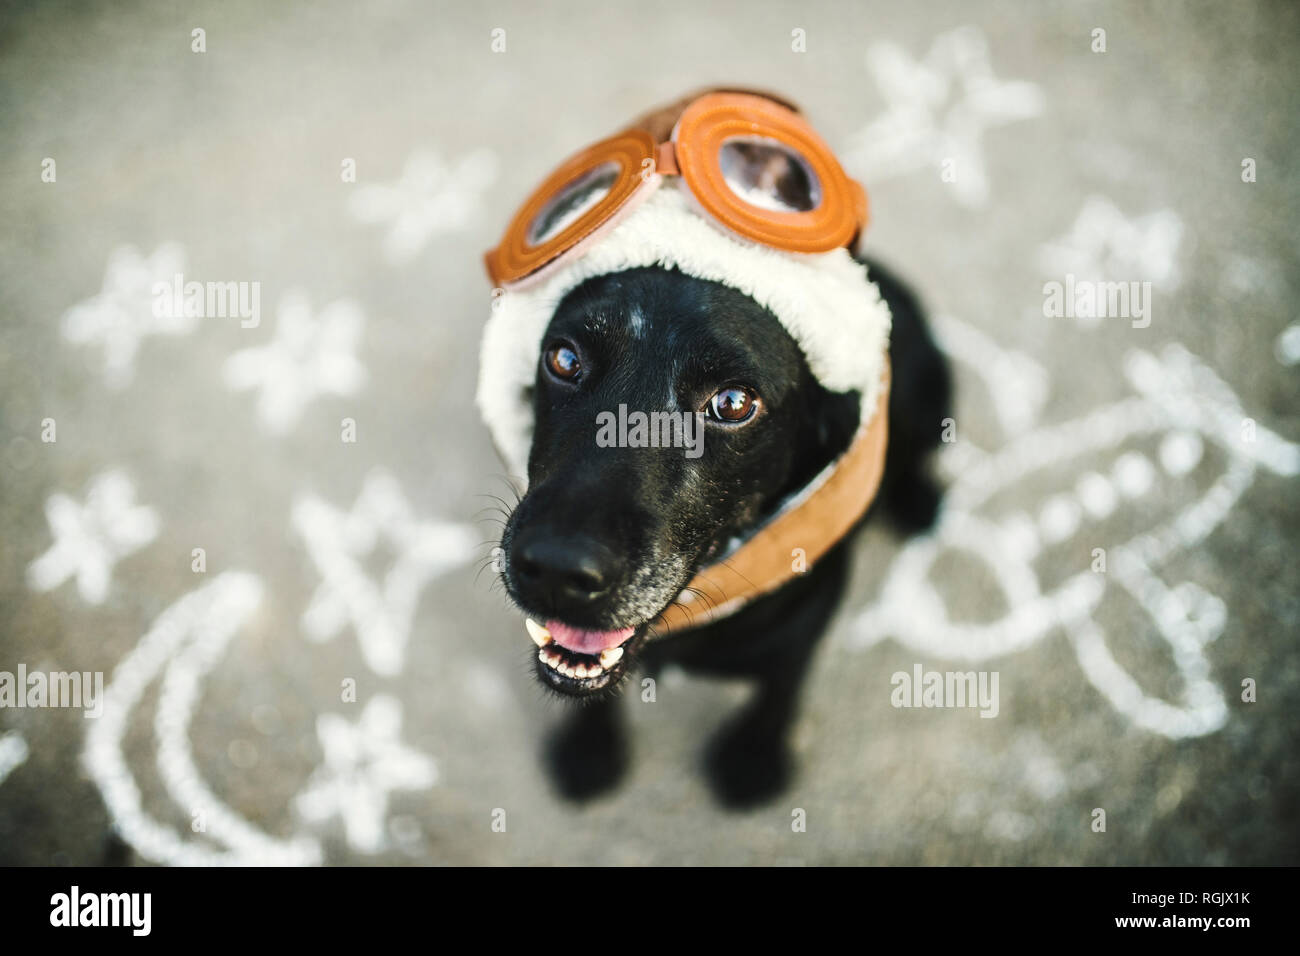 Portrait of black dog wearing flying goggles and hat Stock Photo